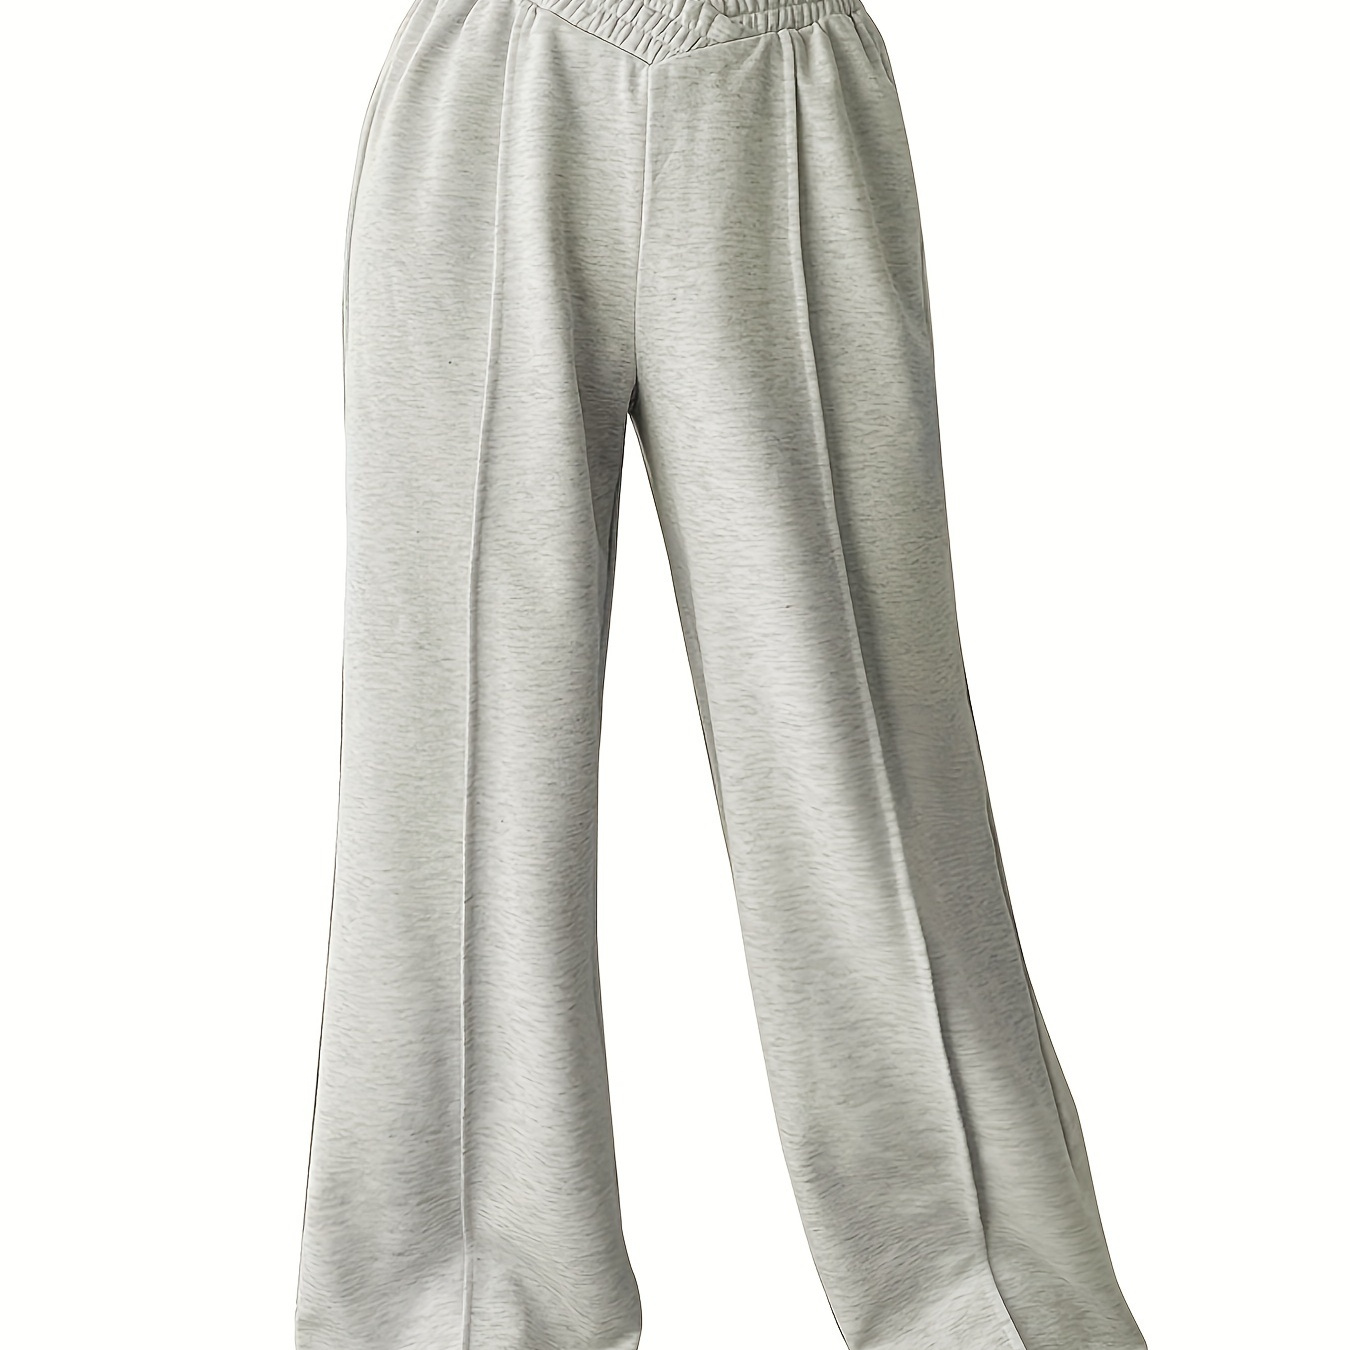 

Girls Criss-cross High Waist Sweatpants Solid Color Sports Casual Trousers